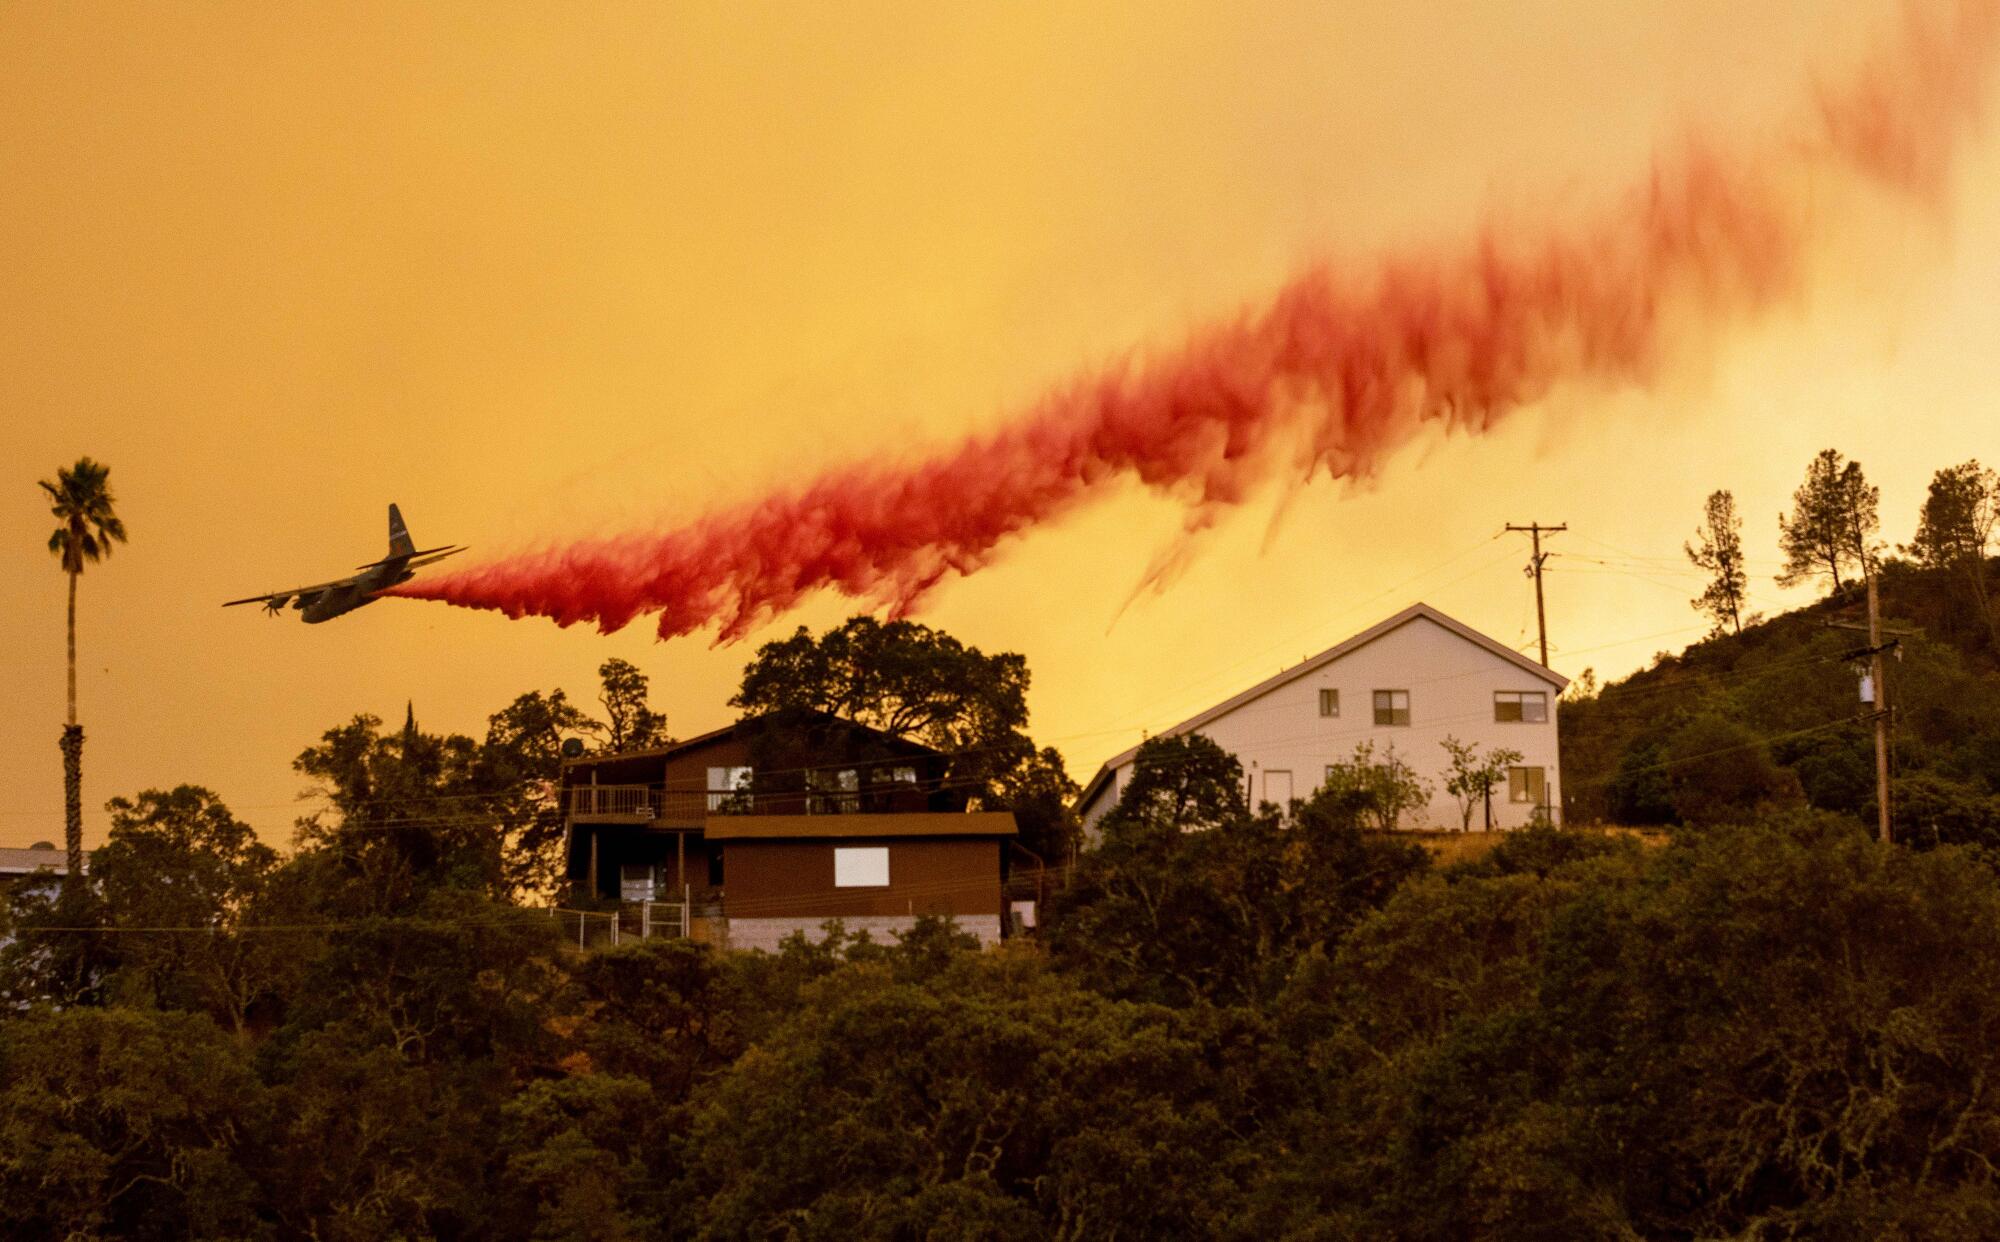 An airplane drops fire retardant over homes in Napa County.